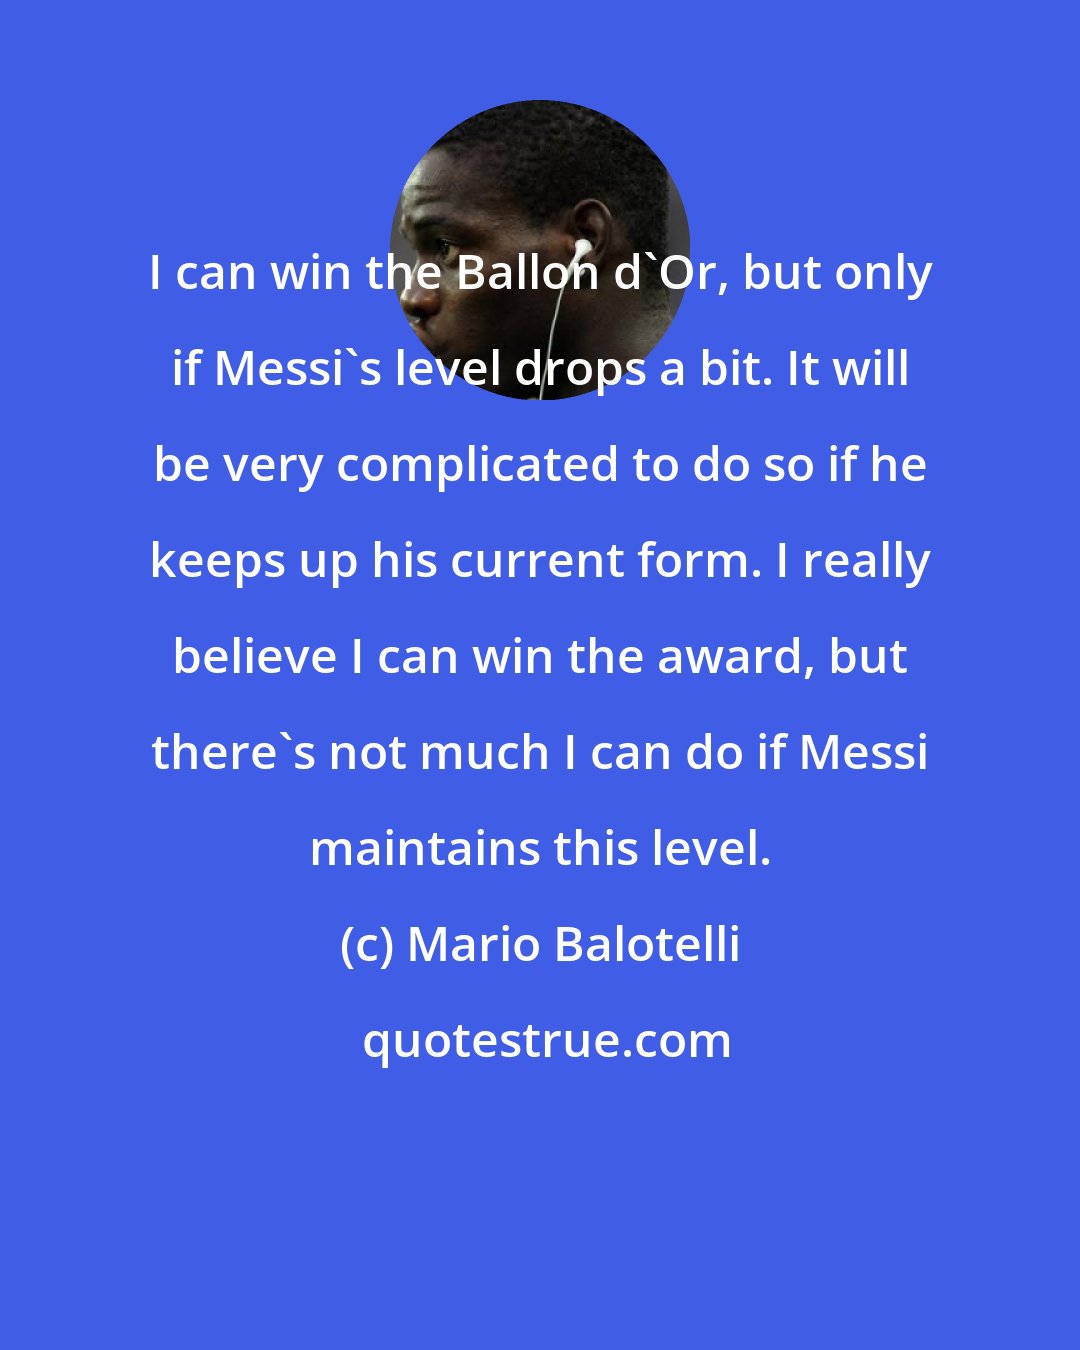 Mario Balotelli: I can win the Ballon d'Or, but only if Messi's level drops a bit. It will be very complicated to do so if he keeps up his current form. I really believe I can win the award, but there's not much I can do if Messi maintains this level.